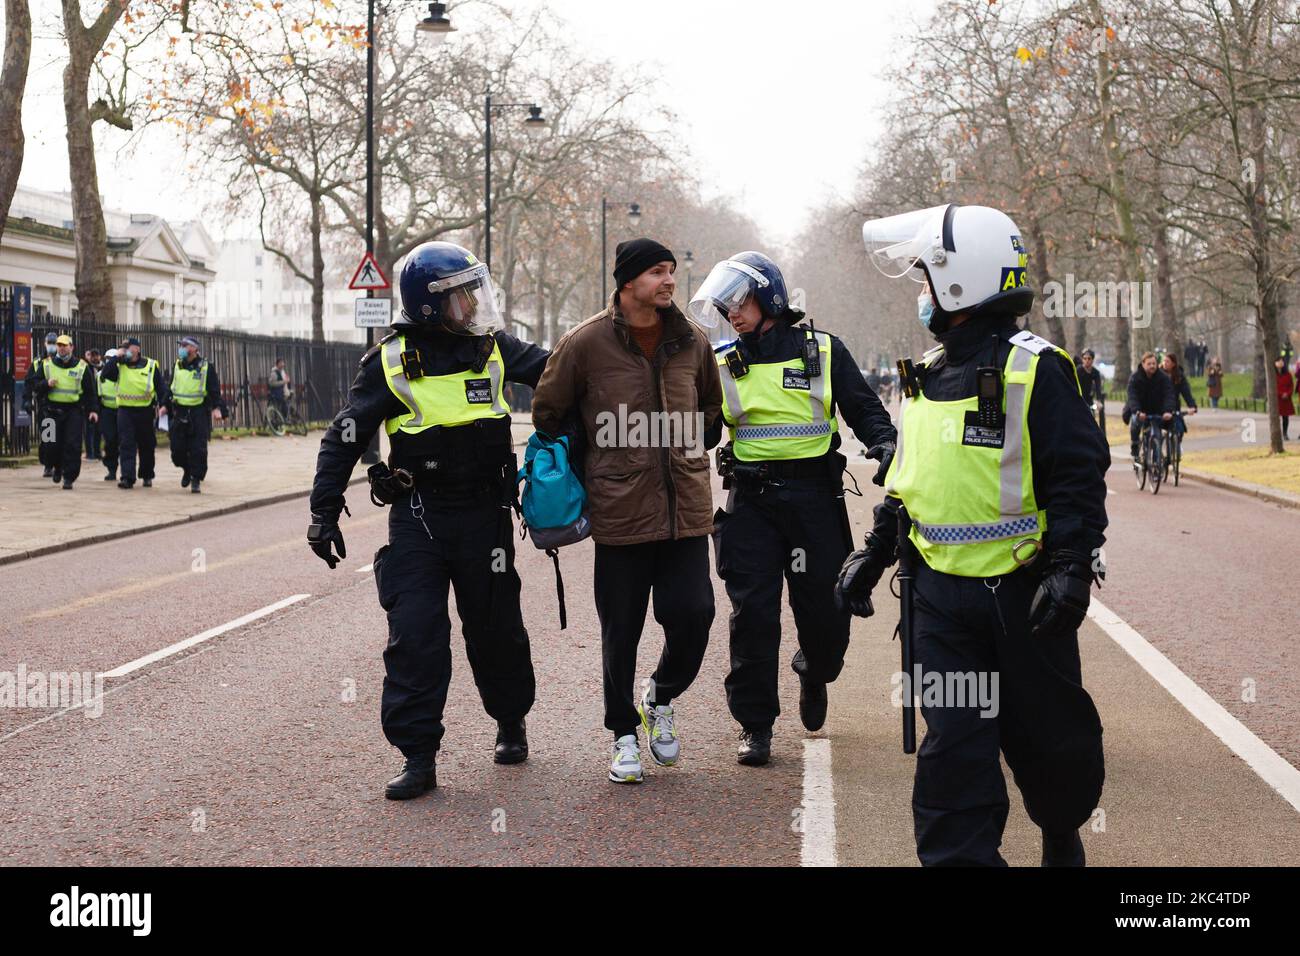 An anti-lockdown activist is arrested on Birdcage Walk during a demonstration in London, England, on November 28, 2020. In an evening update the Metropolitan Police announced it had made 155 arrests over the course of the day's demonstrations, for offences including breaches of coronavirus regulations, assault on police and possession of drugs. London is to return to 'Tier 2' or 'high alert' covid-19 restrictions once the current England-wide coronavirus lockdown ends next Wednesday. All three of the tiers, assigned to local authorities across England, have been strengthened since the lockdown Stock Photo